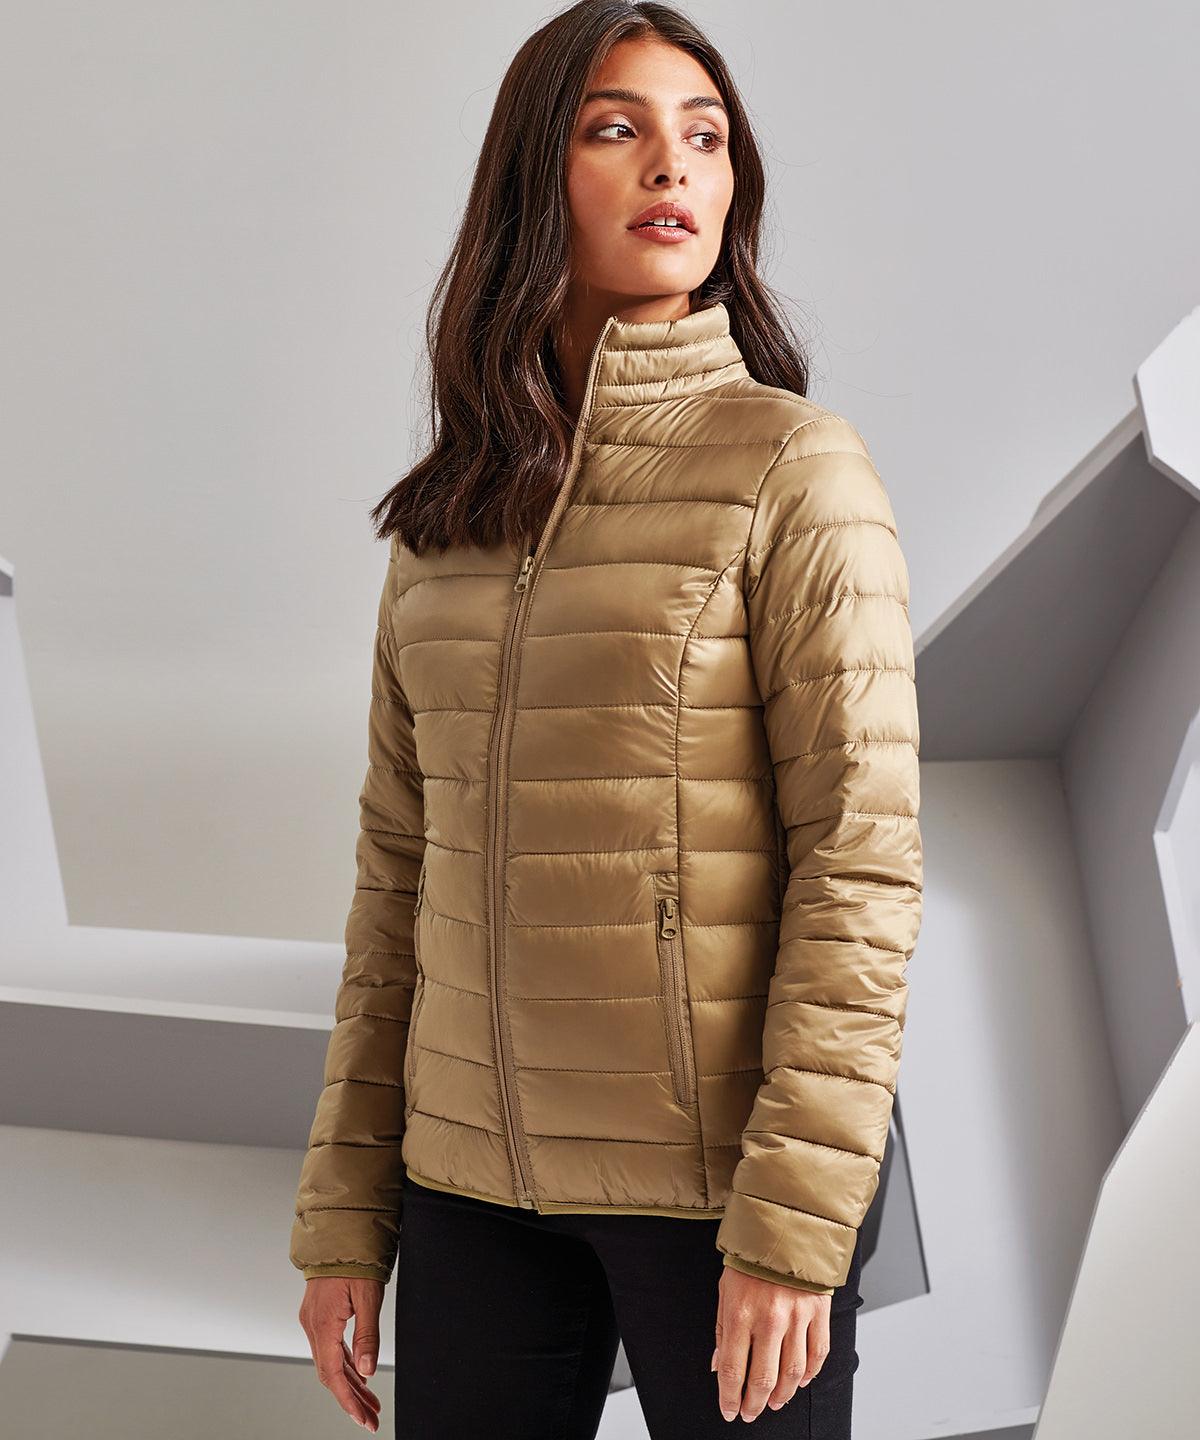 Oyster White - Women's terrain padded jacket Jackets 2786 Jackets & Coats, Must Haves, Padded & Insulation, Padded Perfection, Women's Fashion Schoolwear Centres